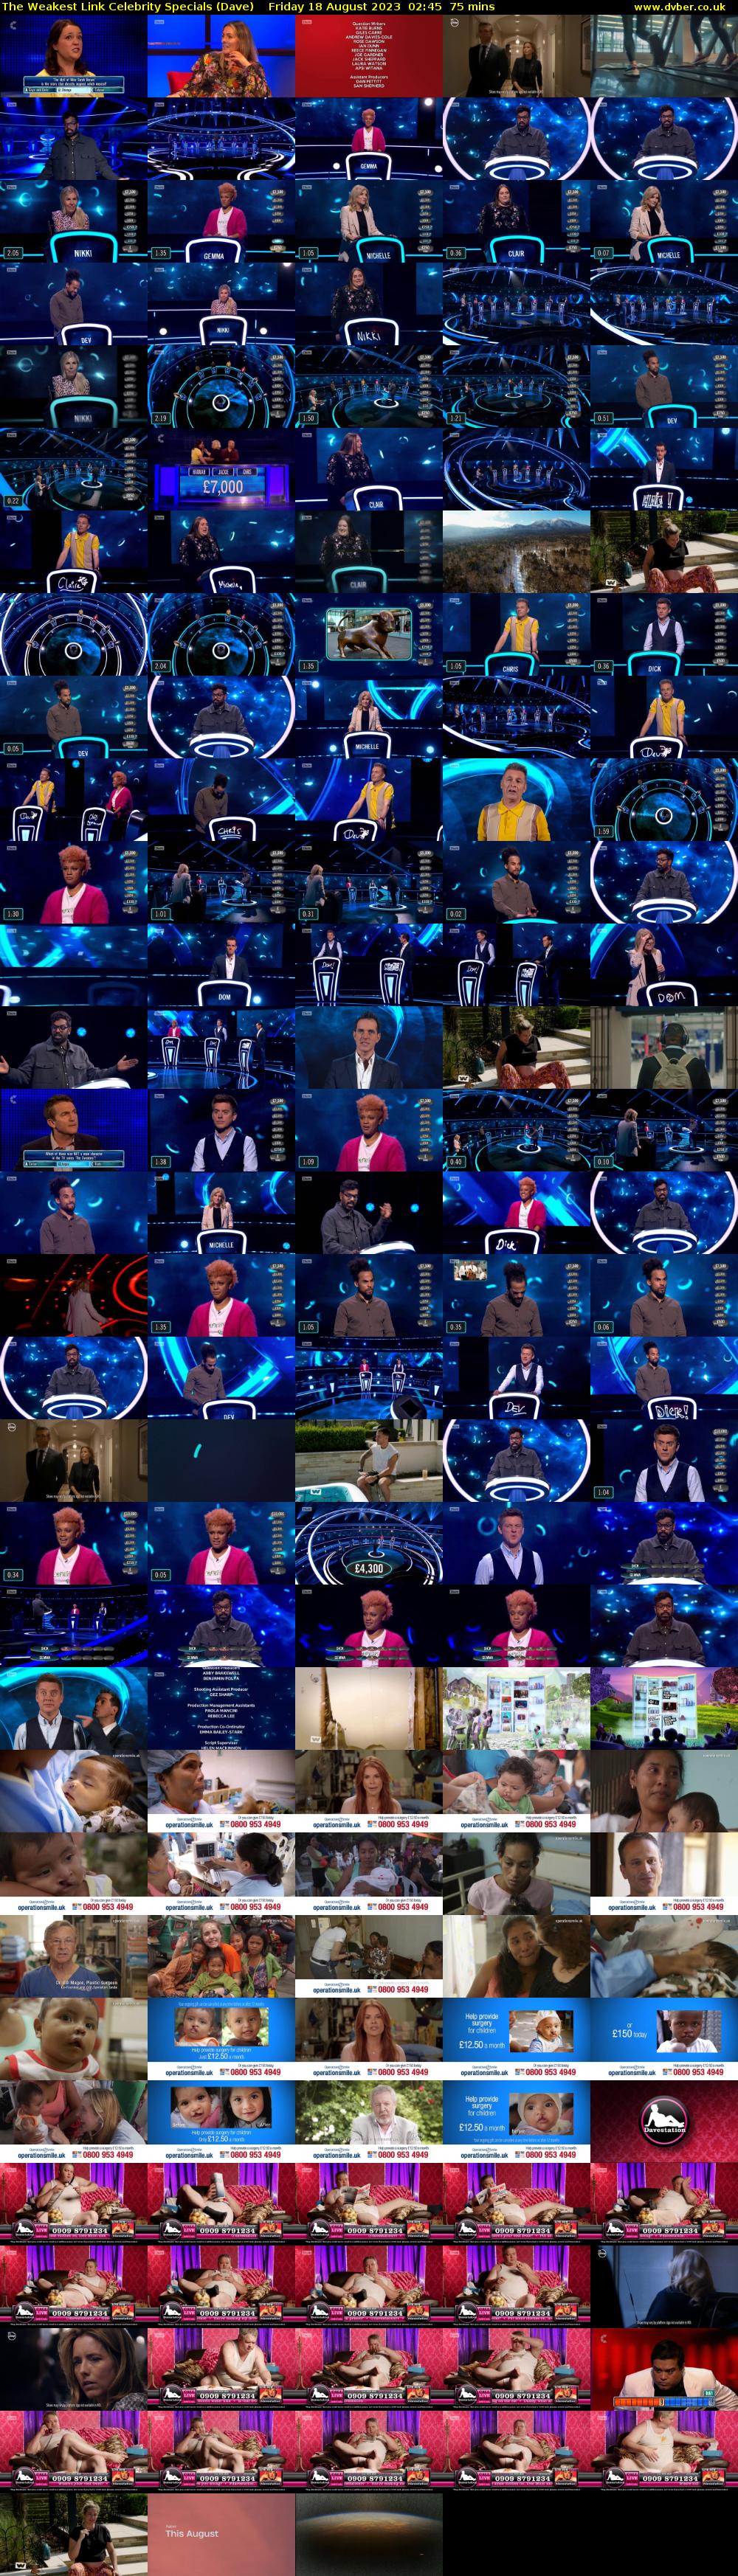 The Weakest Link Celebrity Specials (Dave) Friday 18 August 2023 02:45 - 04:00